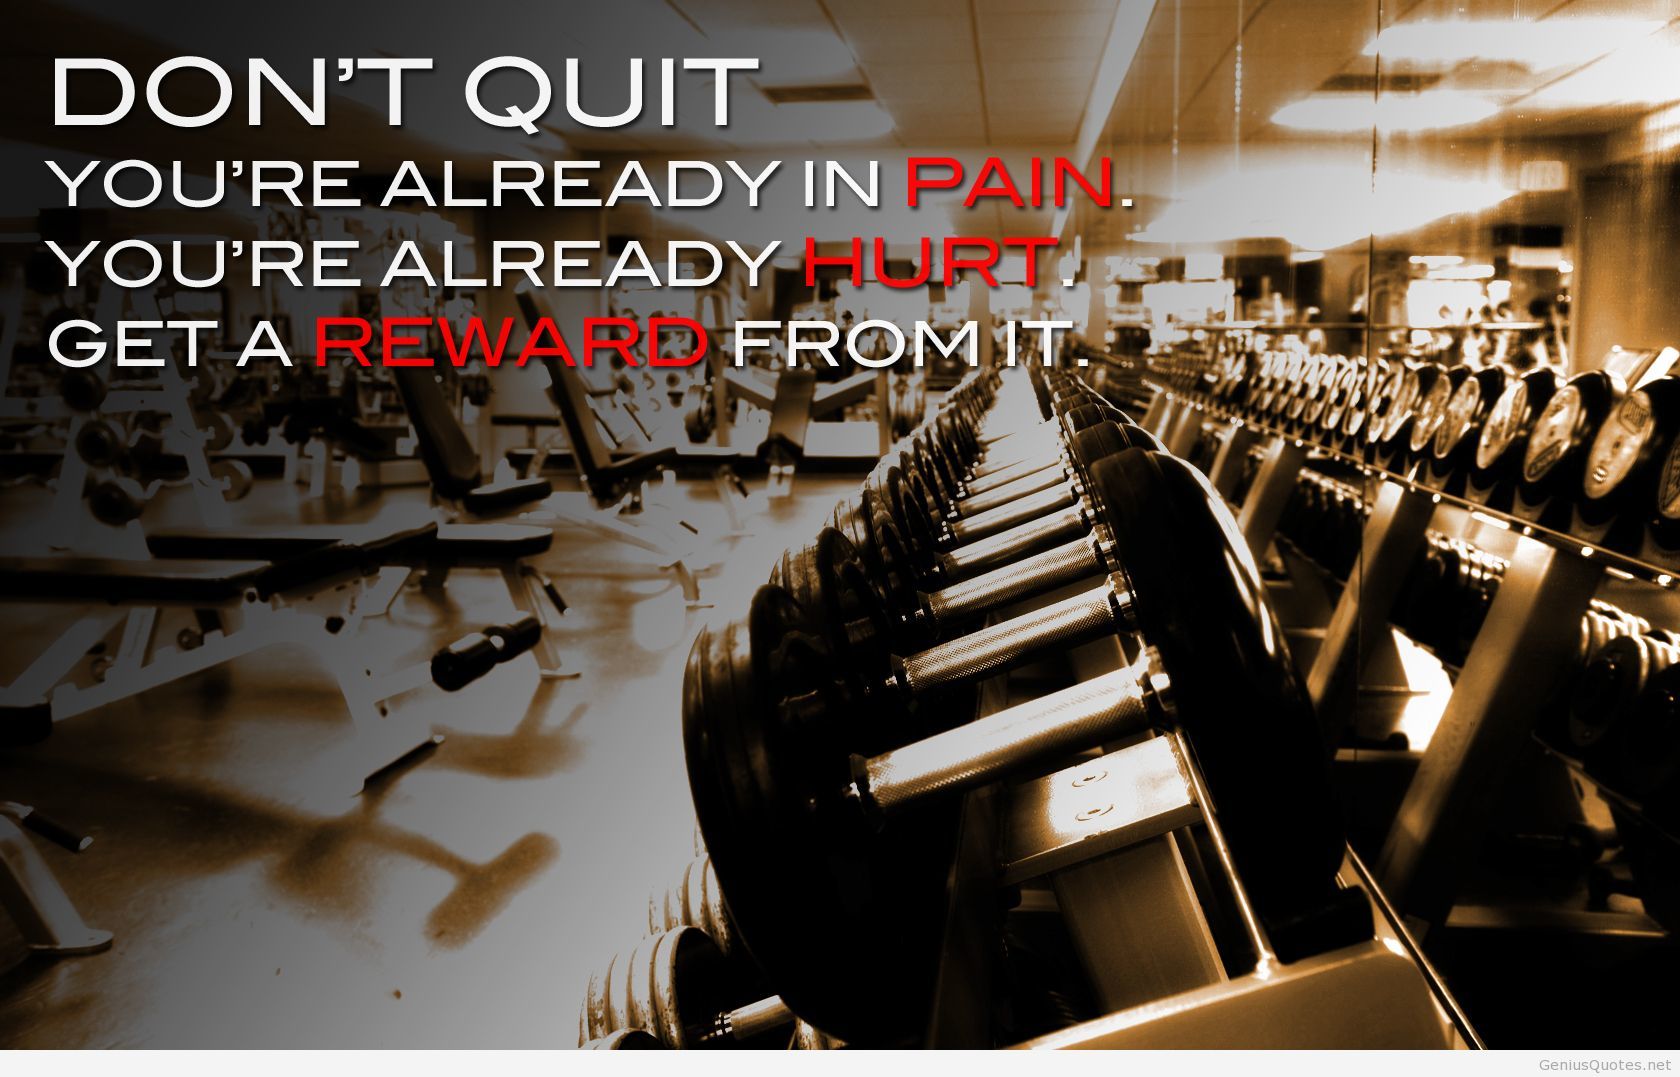 bodybuilding wallpapers with quotes